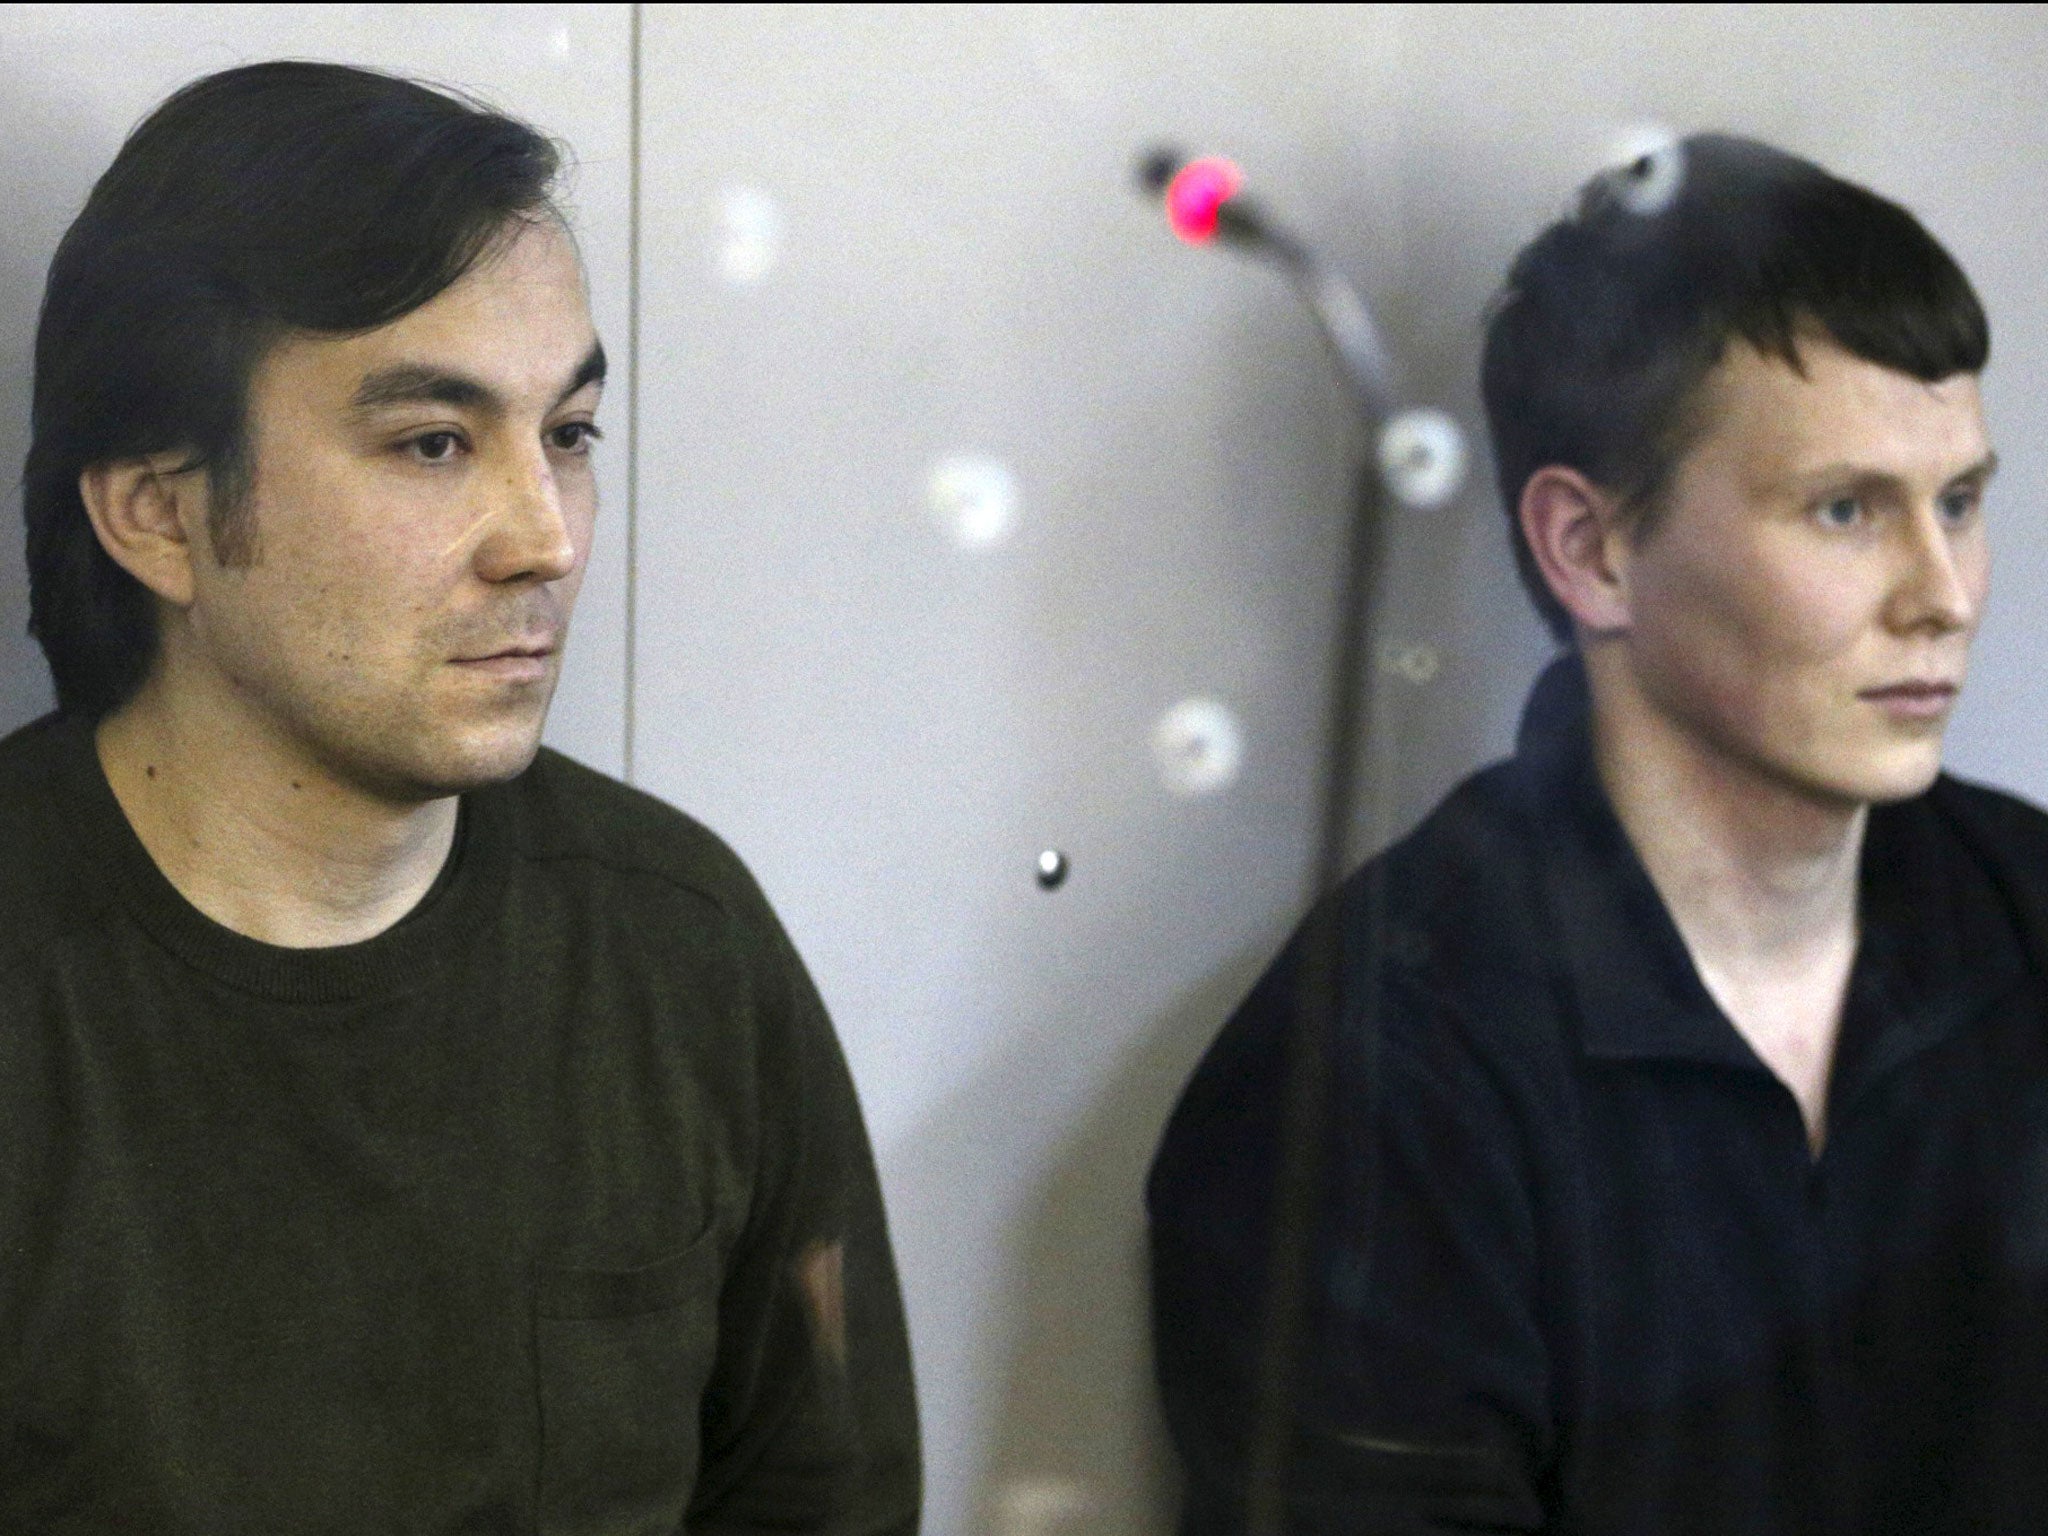 Yevgeny Yerofeyev, left, and Alexander Alexandrov, were arrested last May on terrorism charges related to the conflict in Ukraine